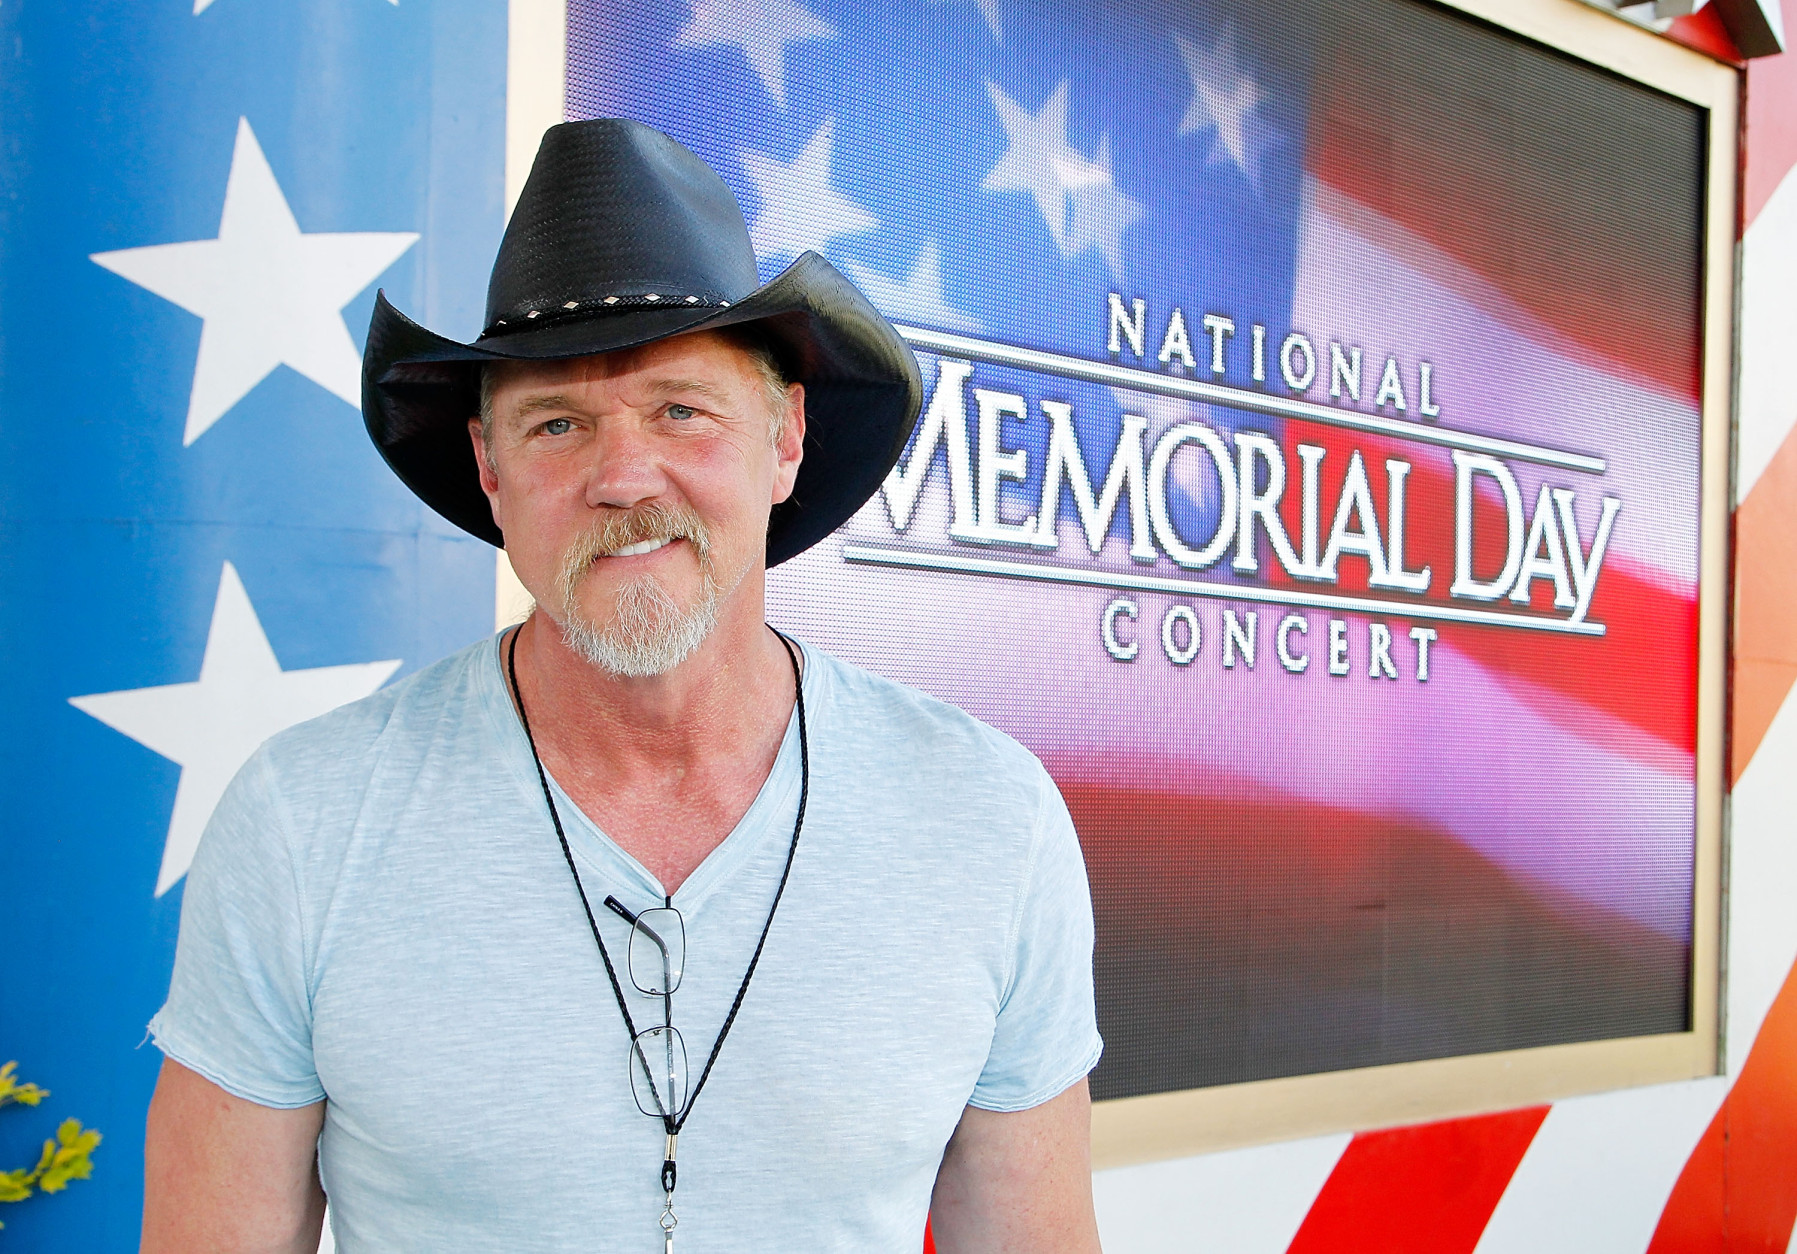 WASHINGTON, DC - MAY 28:  Country music artist Trace Adkins poses for a photo during the 27th National Memorial Day Concert Rehearsals on May 28, 2016 in Washington, DC.  (Photo by Paul Morigi/Getty Images for Capitol Concerts)